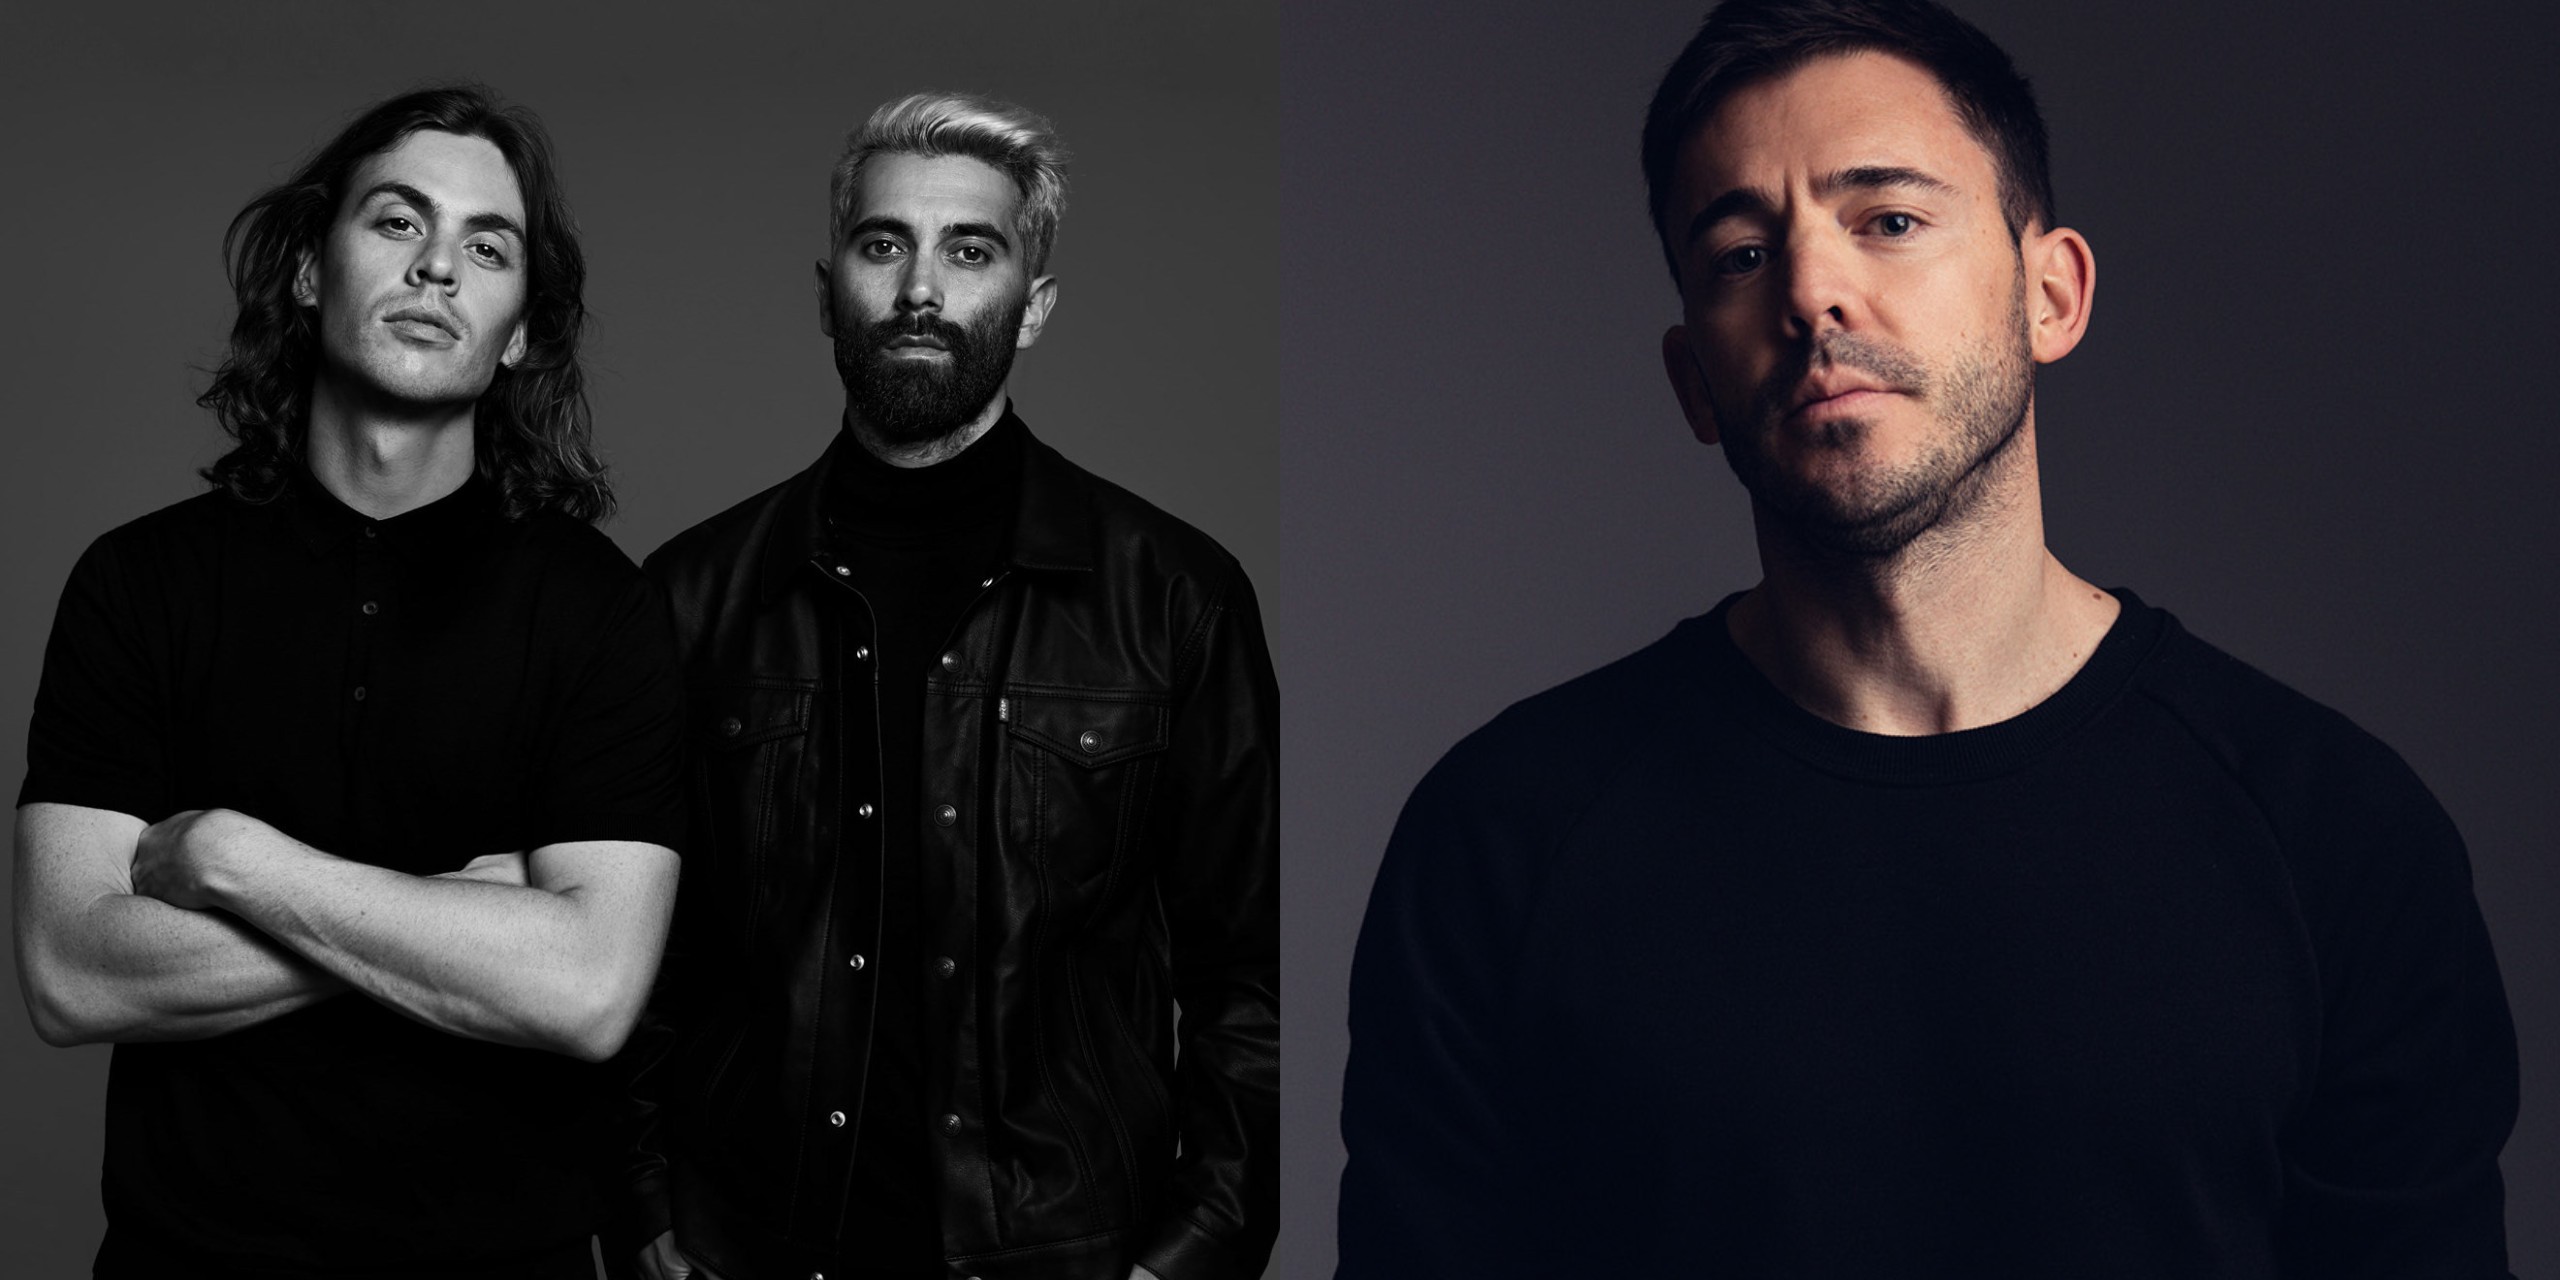 Siam Songkran Festival announces Phase 1 line-up – Darren Styles, Yellow Claw and more to perform, stage takeovers by Barong Family and Q Dance